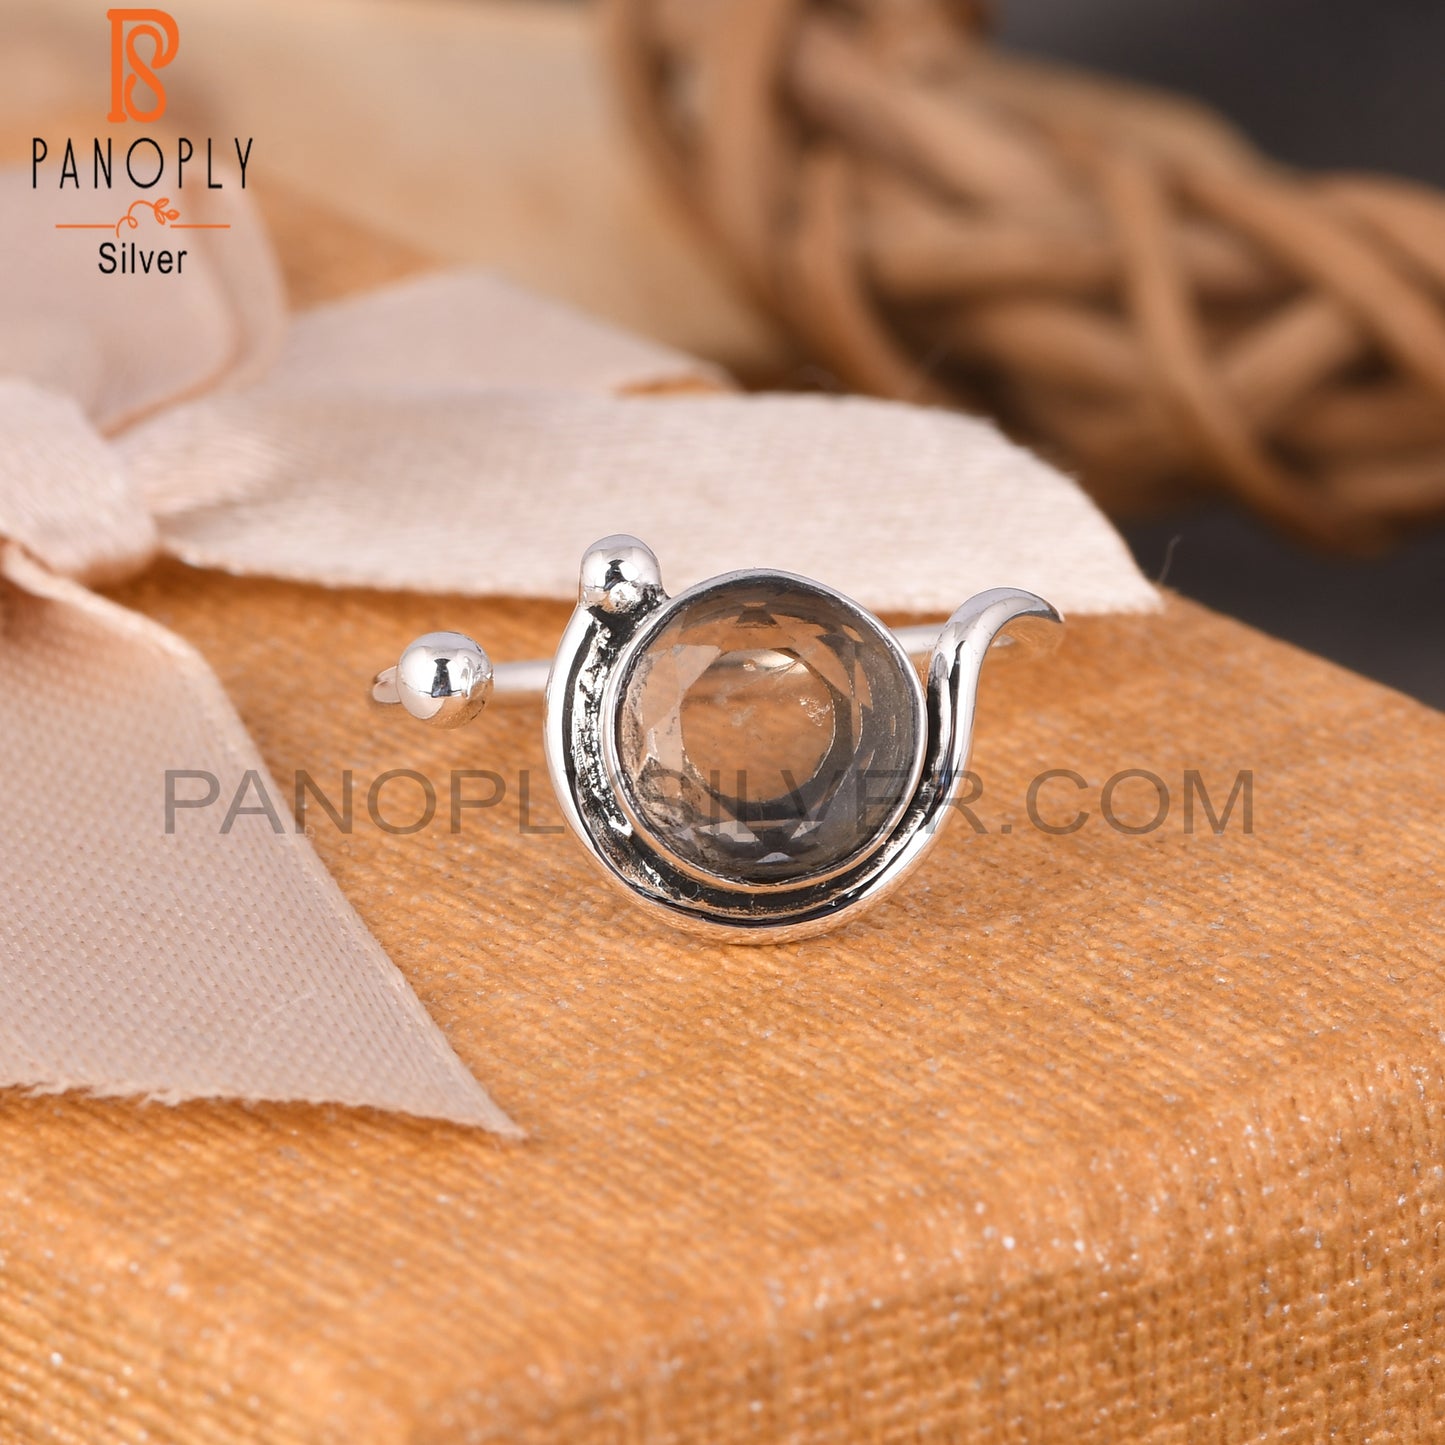 Fluorite Round 925 Sterling Silver Ring